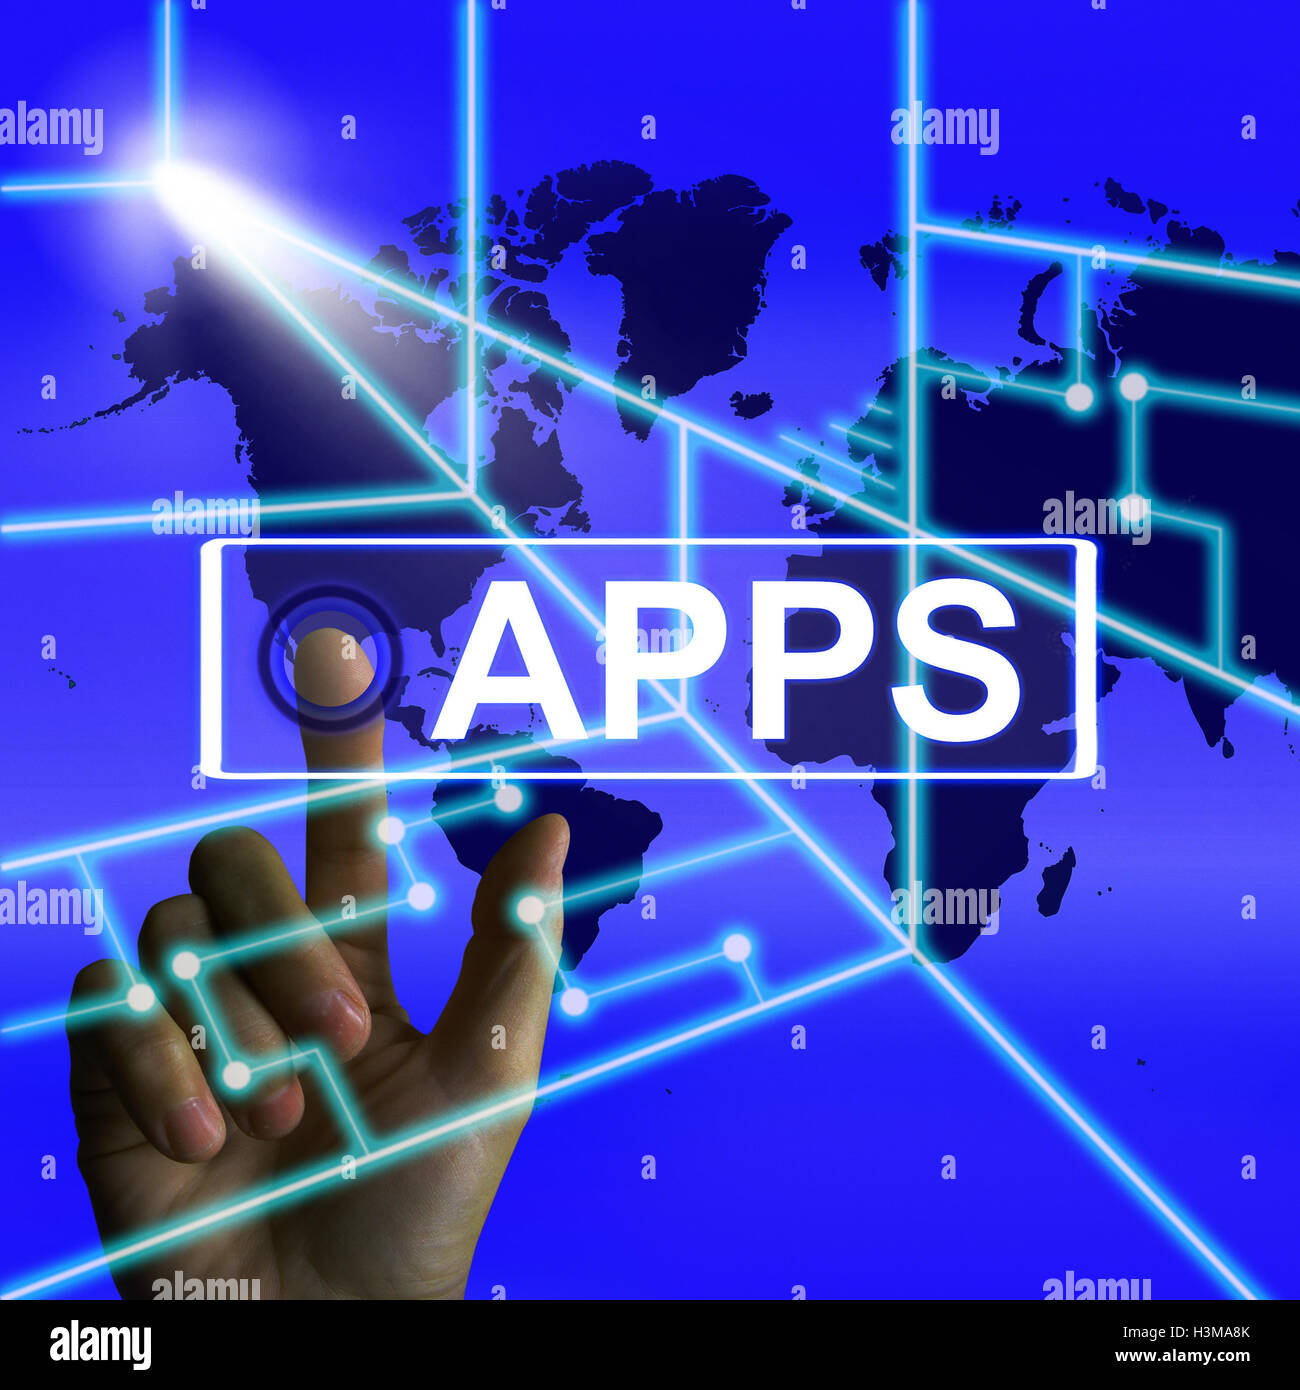 Apps Screen Represents International and Worldwide Applications Stock Photo